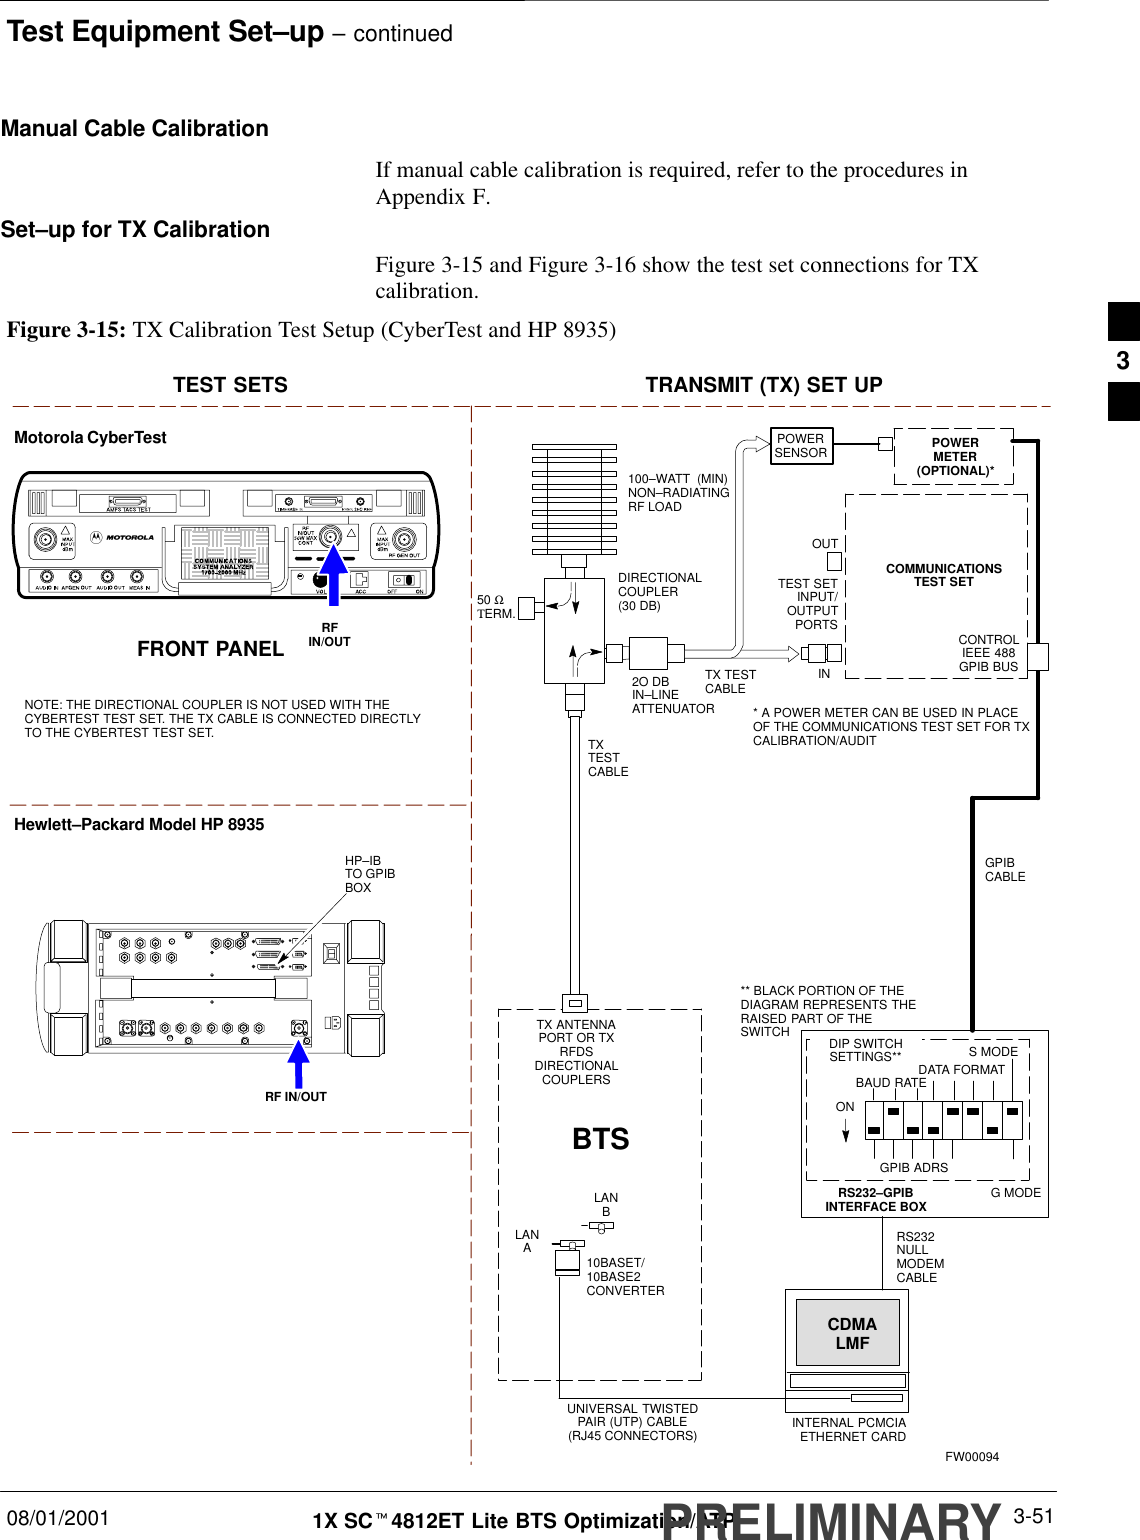 Test Equipment Set–up – continued08/01/2001 3-511X SCt4812ET Lite BTS Optimization/ATPPRELIMINARYManual Cable CalibrationIf manual cable calibration is required, refer to the procedures inAppendix F.Set–up for TX CalibrationFigure 3-15 and Figure 3-16 show the test set connections for TXcalibration.Motorola CyberTestHewlett–Packard Model HP 8935TEST SETS TRANSMIT (TX) SET UPFRONT PANEL RFIN/OUTRF IN/OUTHP–IBTO GPIBBOXRS232–GPIBINTERFACE BOXINTERNAL PCMCIAETHERNET CARDGPIBCABLECOMMUNICATIONSTEST SETCONTROLIEEE 488GPIB BUSUNIVERSAL TWISTEDPAIR (UTP) CABLE(RJ45 CONNECTORS)RS232NULLMODEMCABLEOUTS MODEDATA FORMATBAUD RATEGPIB ADRSG MODEONTEST SETINPUT/OUTPUTPORTSBTS100–WATT  (MIN)NON–RADIATINGRF LOADINTXTESTCABLECDMALMFDIP SWITCHSETTINGS**2O DBIN–LINEATTENUATOR10BASET/10BASE2CONVERTERLANBLANATX TESTCABLETX ANTENNAPORT OR TXRFDSDIRECTIONALCOUPLERSPOWERMETER(OPTIONAL)*NOTE: THE DIRECTIONAL COUPLER IS NOT USED WITH THECYBERTEST TEST SET. THE TX CABLE IS CONNECTED DIRECTLYTO THE CYBERTEST TEST SET.* A POWER METER CAN BE USED IN PLACEOF THE COMMUNICATIONS TEST SET FOR TXCALIBRATION/AUDITPOWERSENSORFigure 3-15: TX Calibration Test Setup (CyberTest and HP 8935)FW00094DIRECTIONALCOUPLER(30 DB)** BLACK PORTION OF THEDIAGRAM REPRESENTS THERAISED PART OF THESWITCH50 ΩΤERM.3